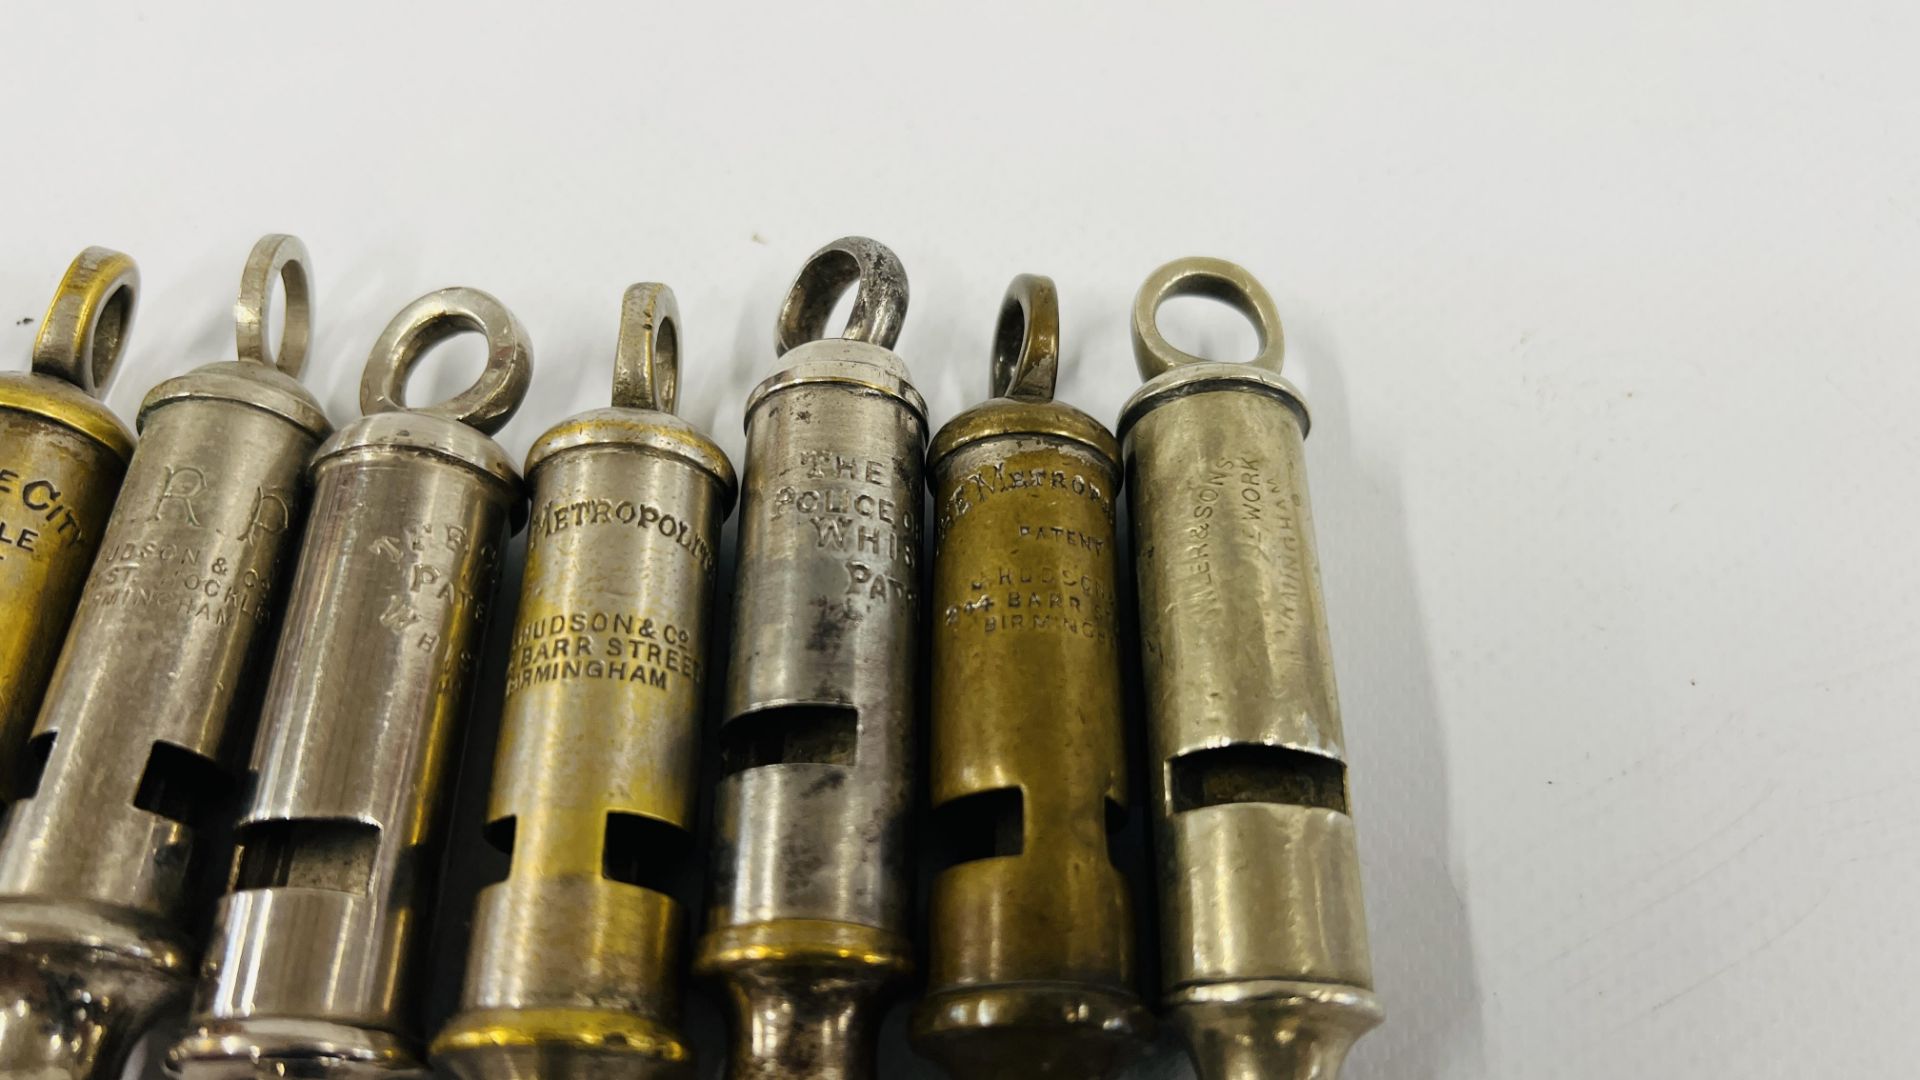 A COLLECTION OF 8 VINTAGE WHISTLES A.R.P WW2 1909-23, ACME CITY'S J. - Image 4 of 5